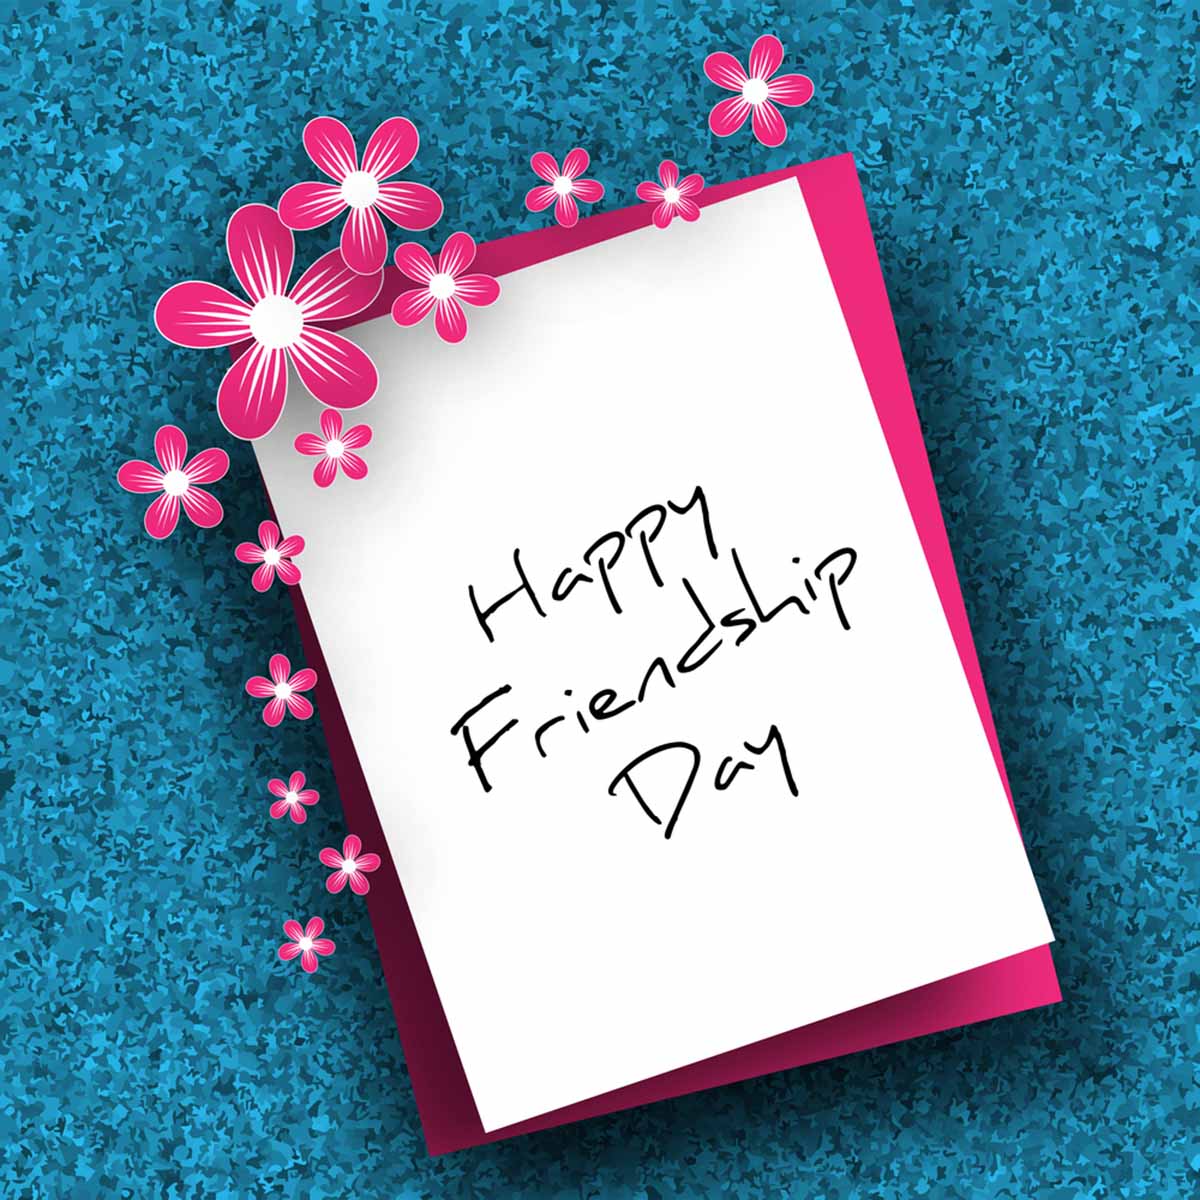 happy friendship day greetings card